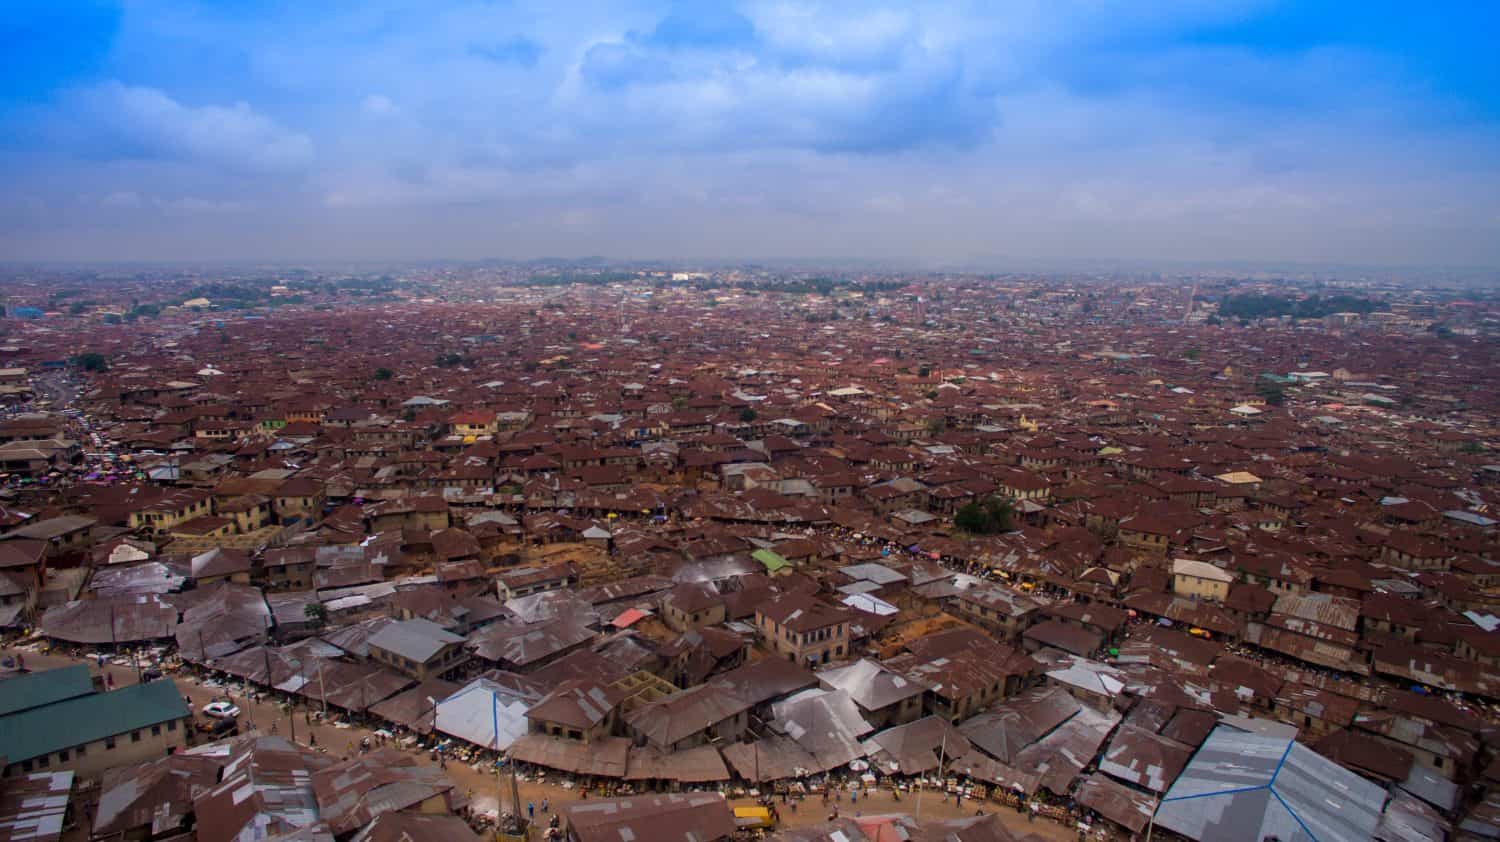 Aerial view of ancient city of Ibadan Nigeria